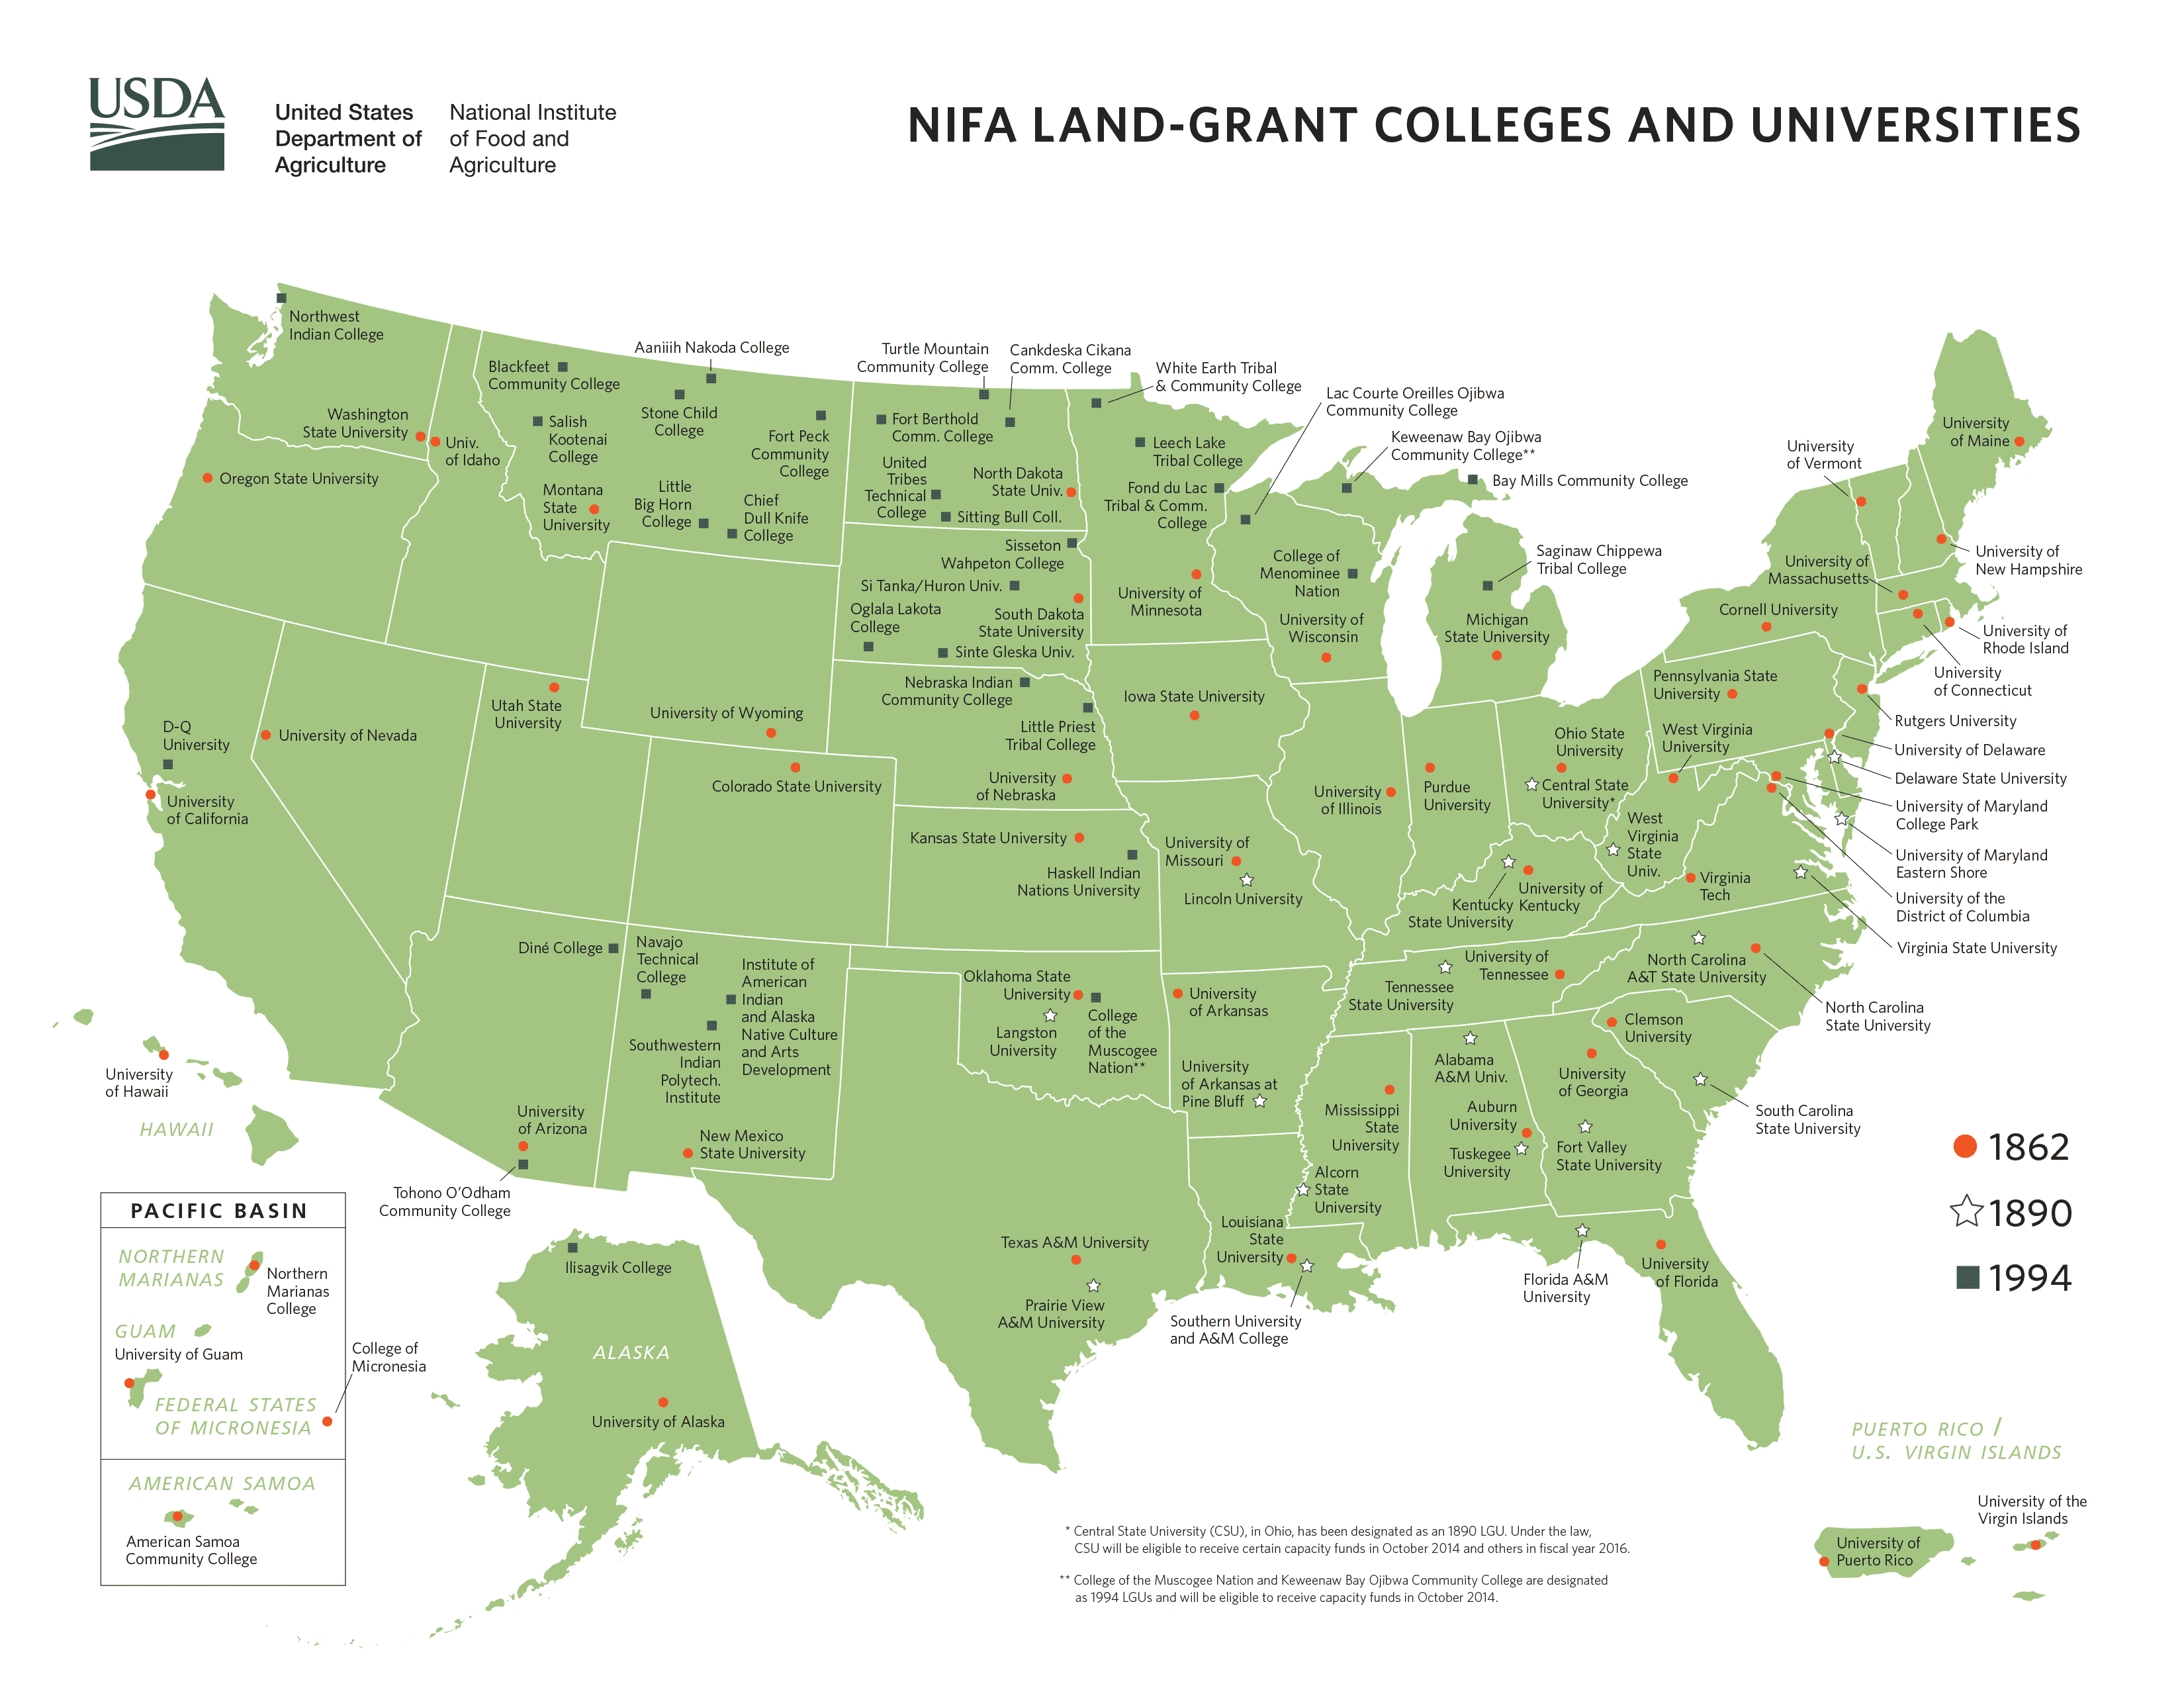 USA map depicting the location of all Land Grant College and Universities and their authorization date (1862, 1890, or 1994).